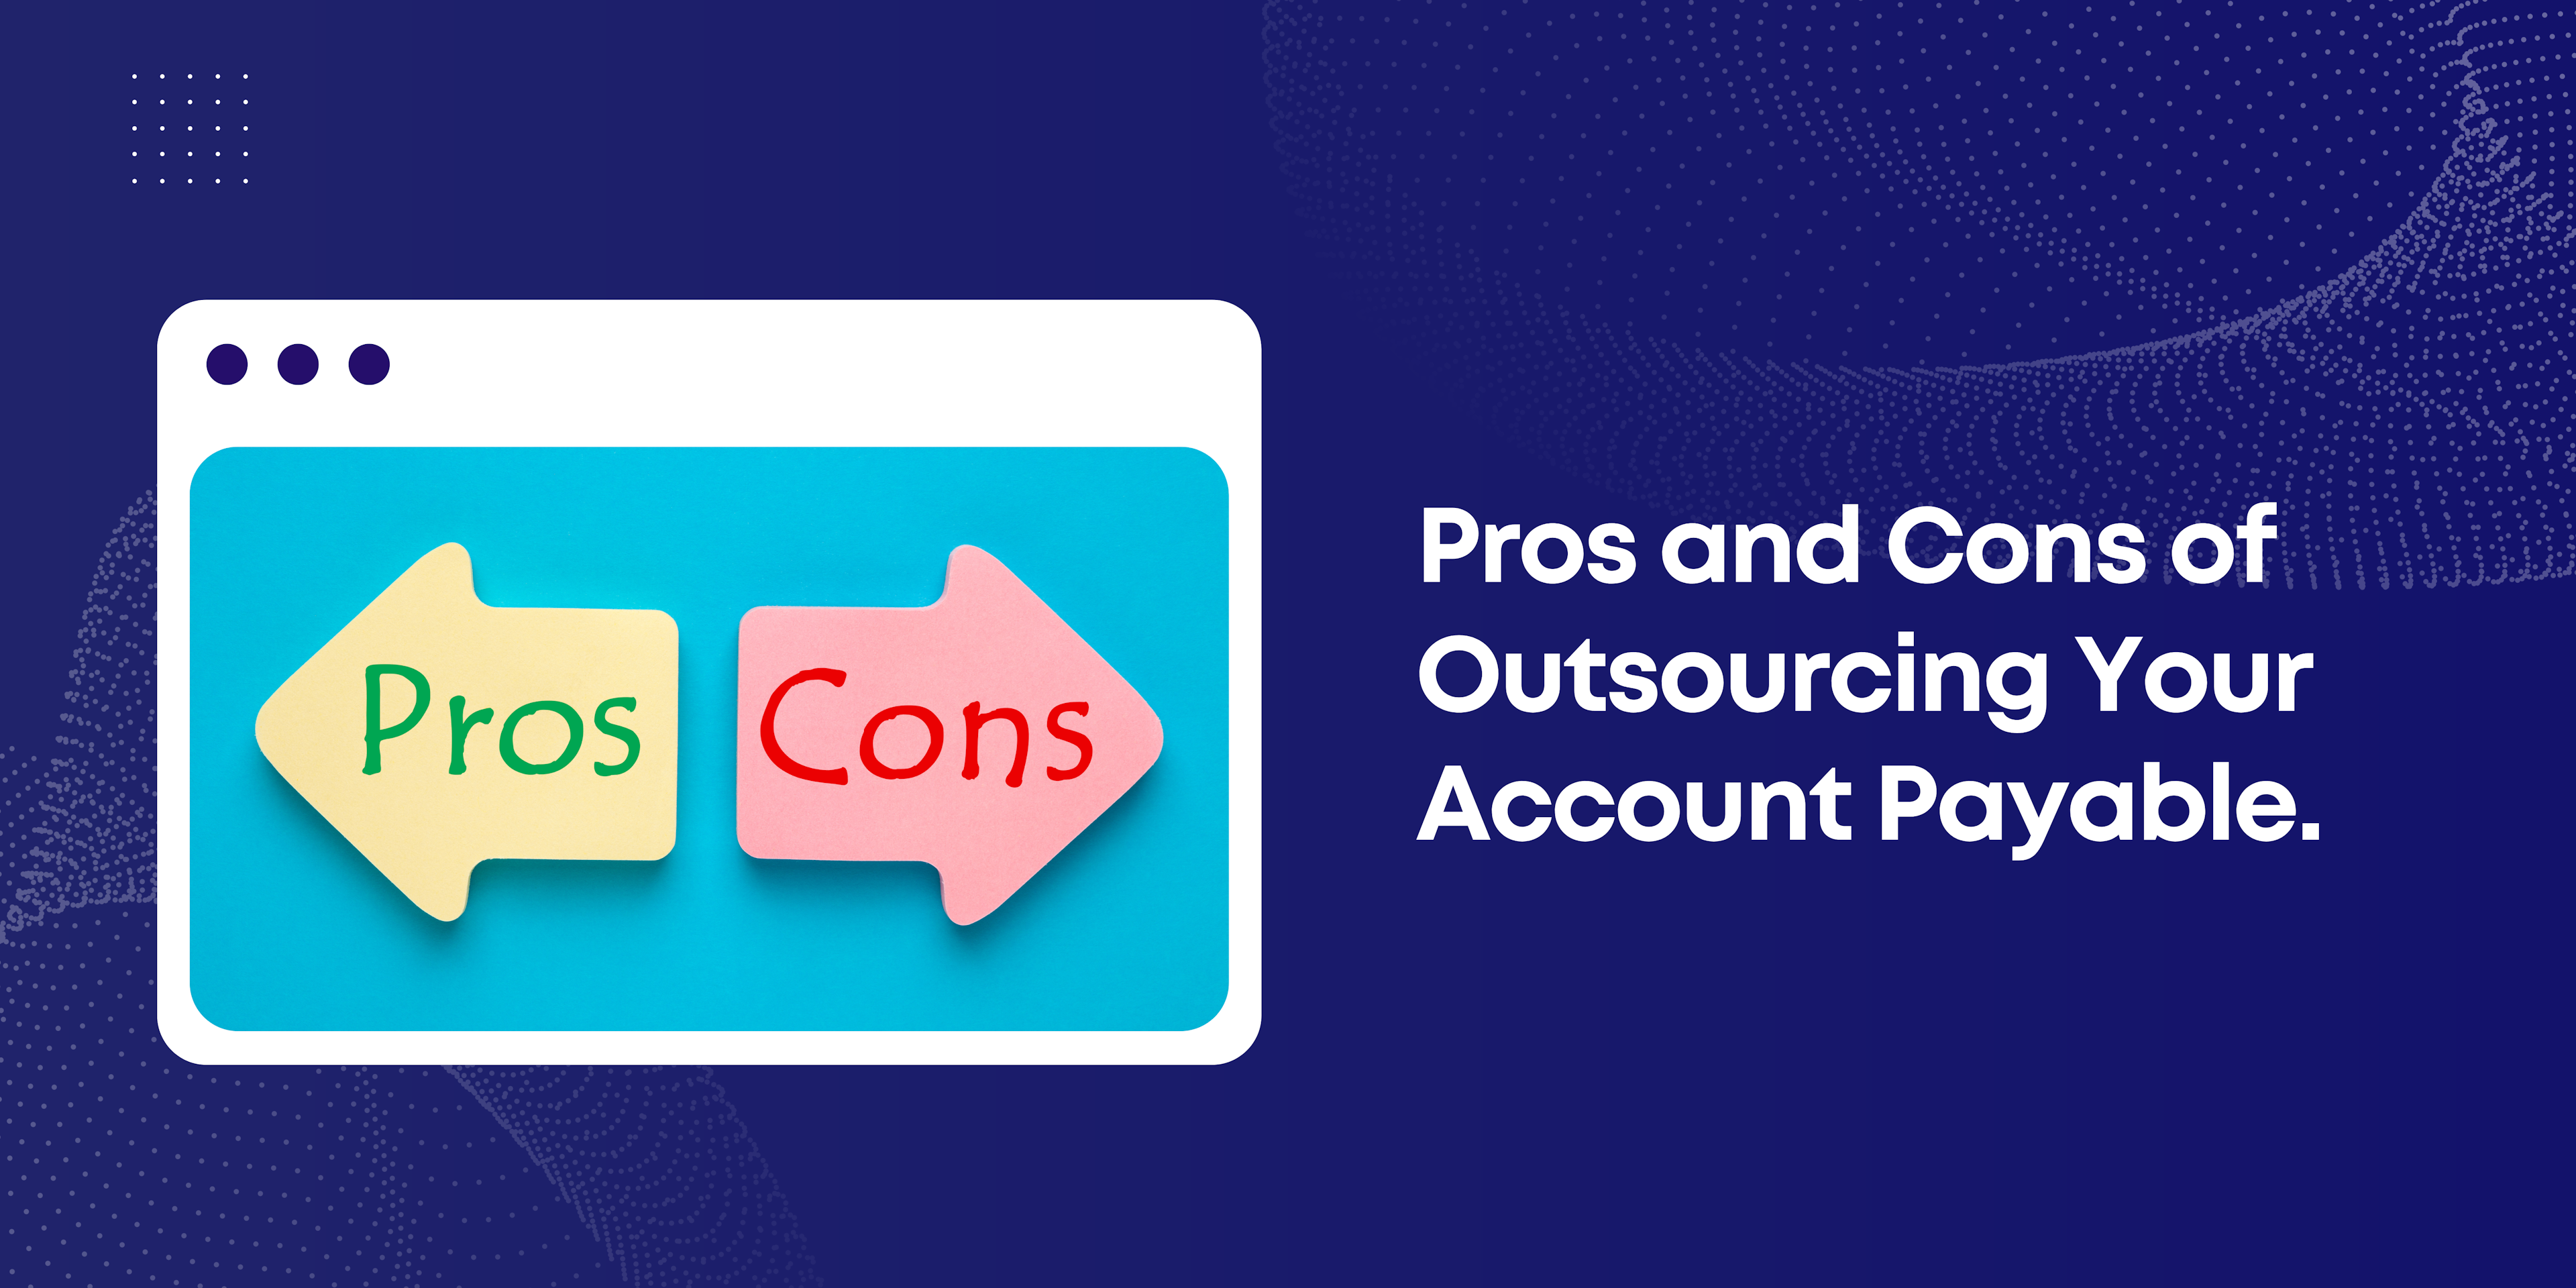 Say goodbye to manual tasks and hello to a streamlined AP process with outsourcing